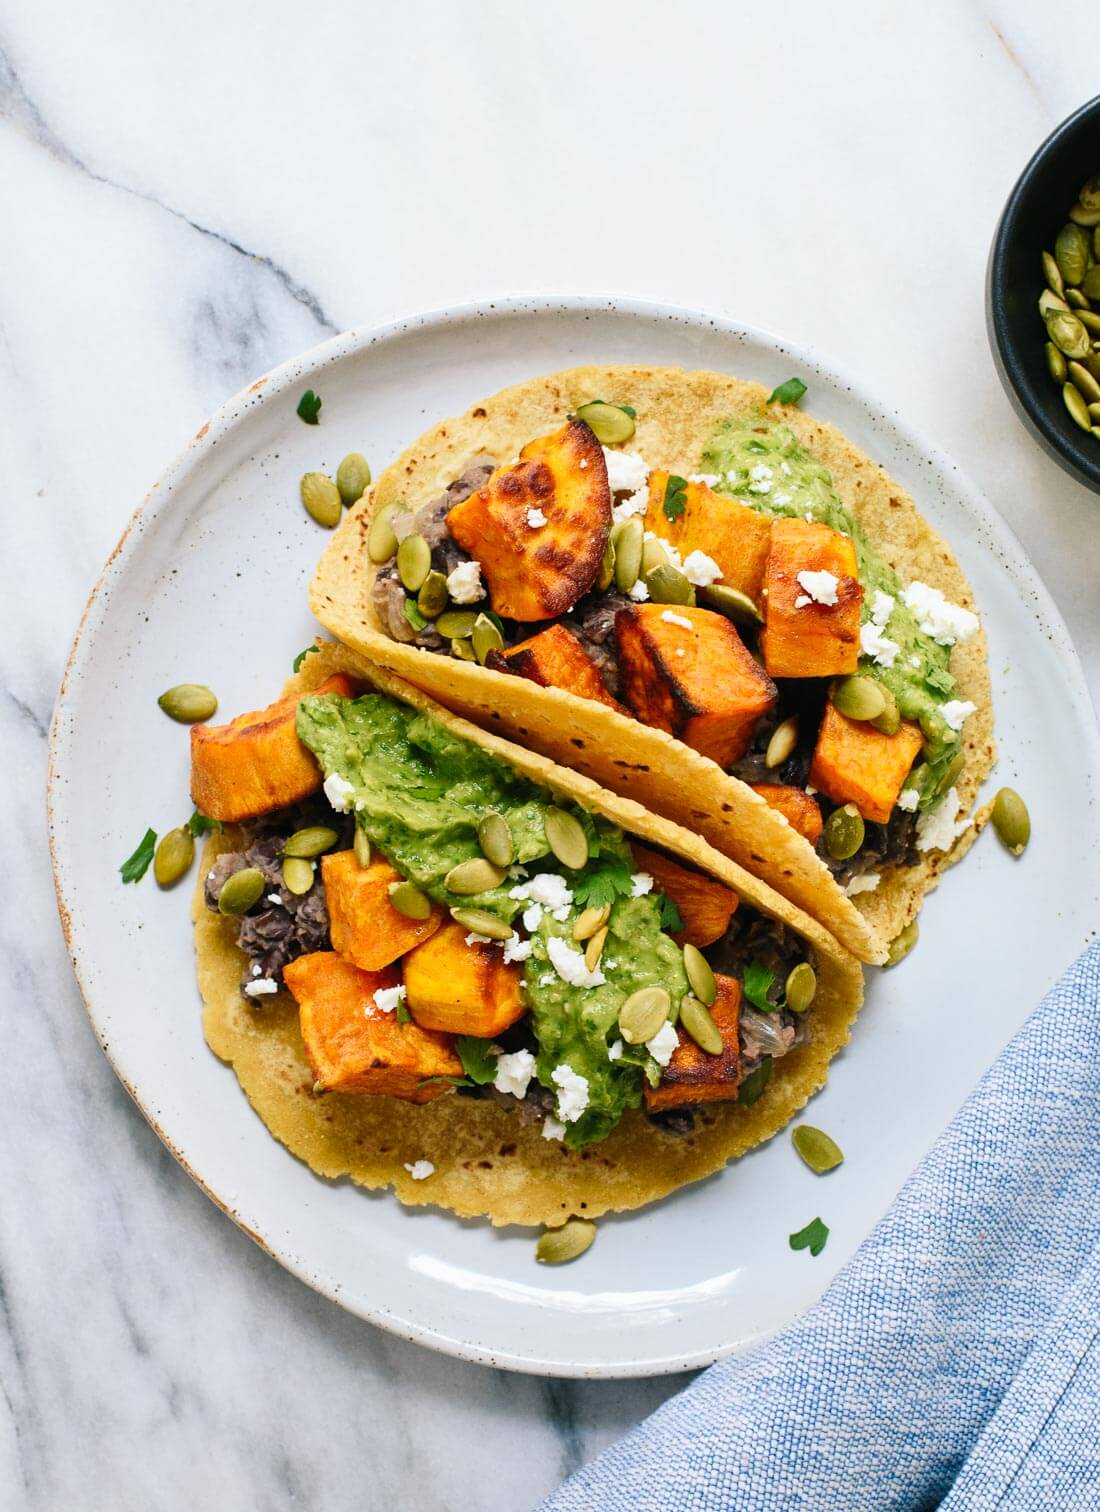 Hearty roasted sweet potato and black bean tacos with incredible avocado-pepita sauce! This vegetarian dinner is delicious and fun to make. cookieandkate.com